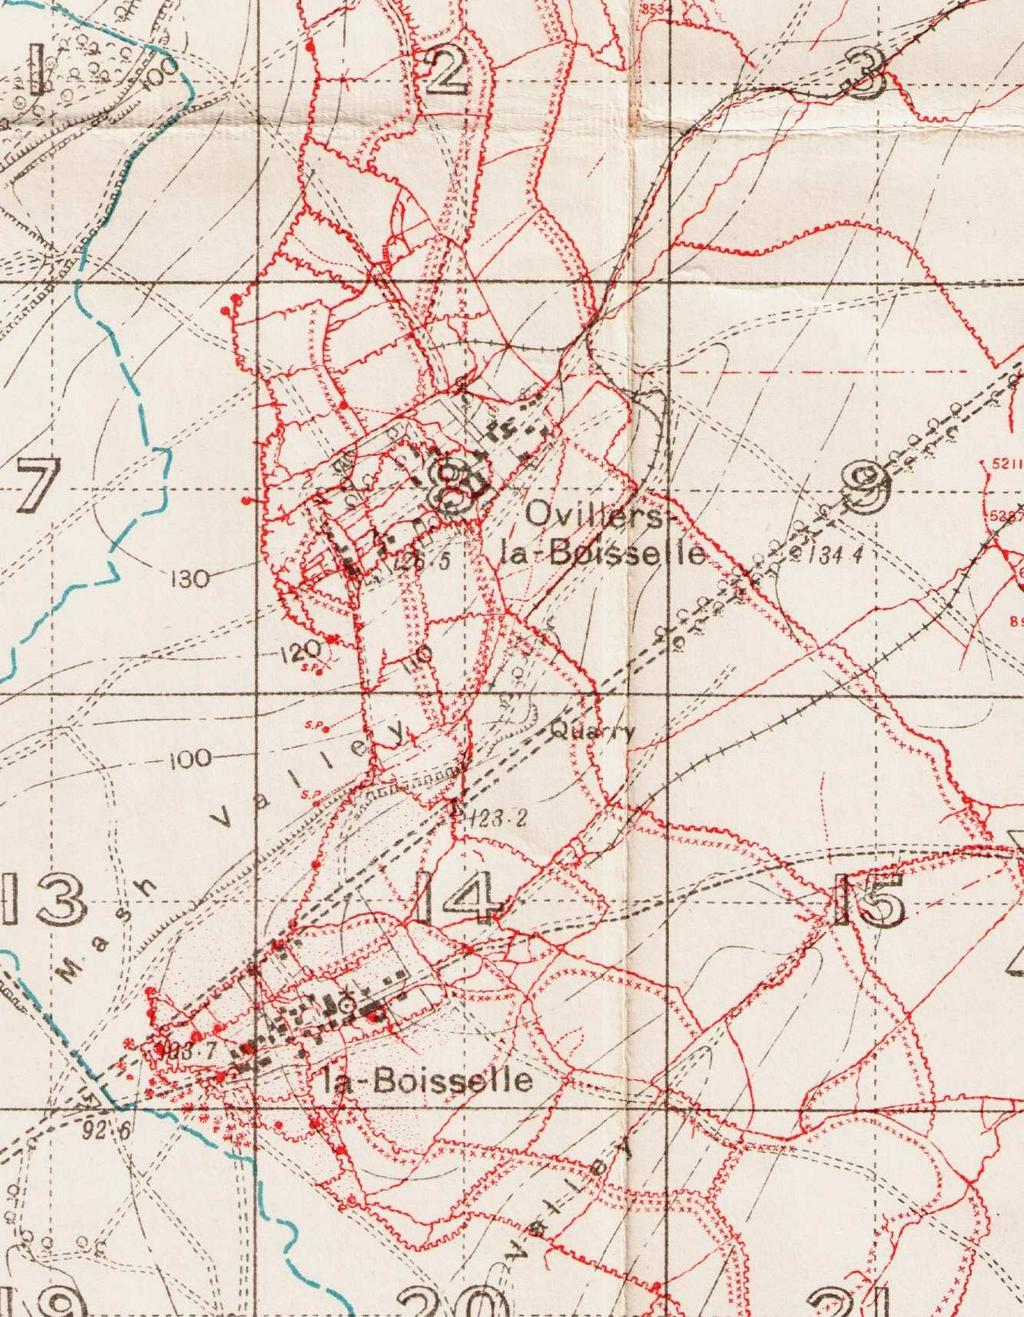 The Germans in the area of III Corps suffered very badly from the British bombardment. German numbers were whittled down. Communication became almost non-existent.